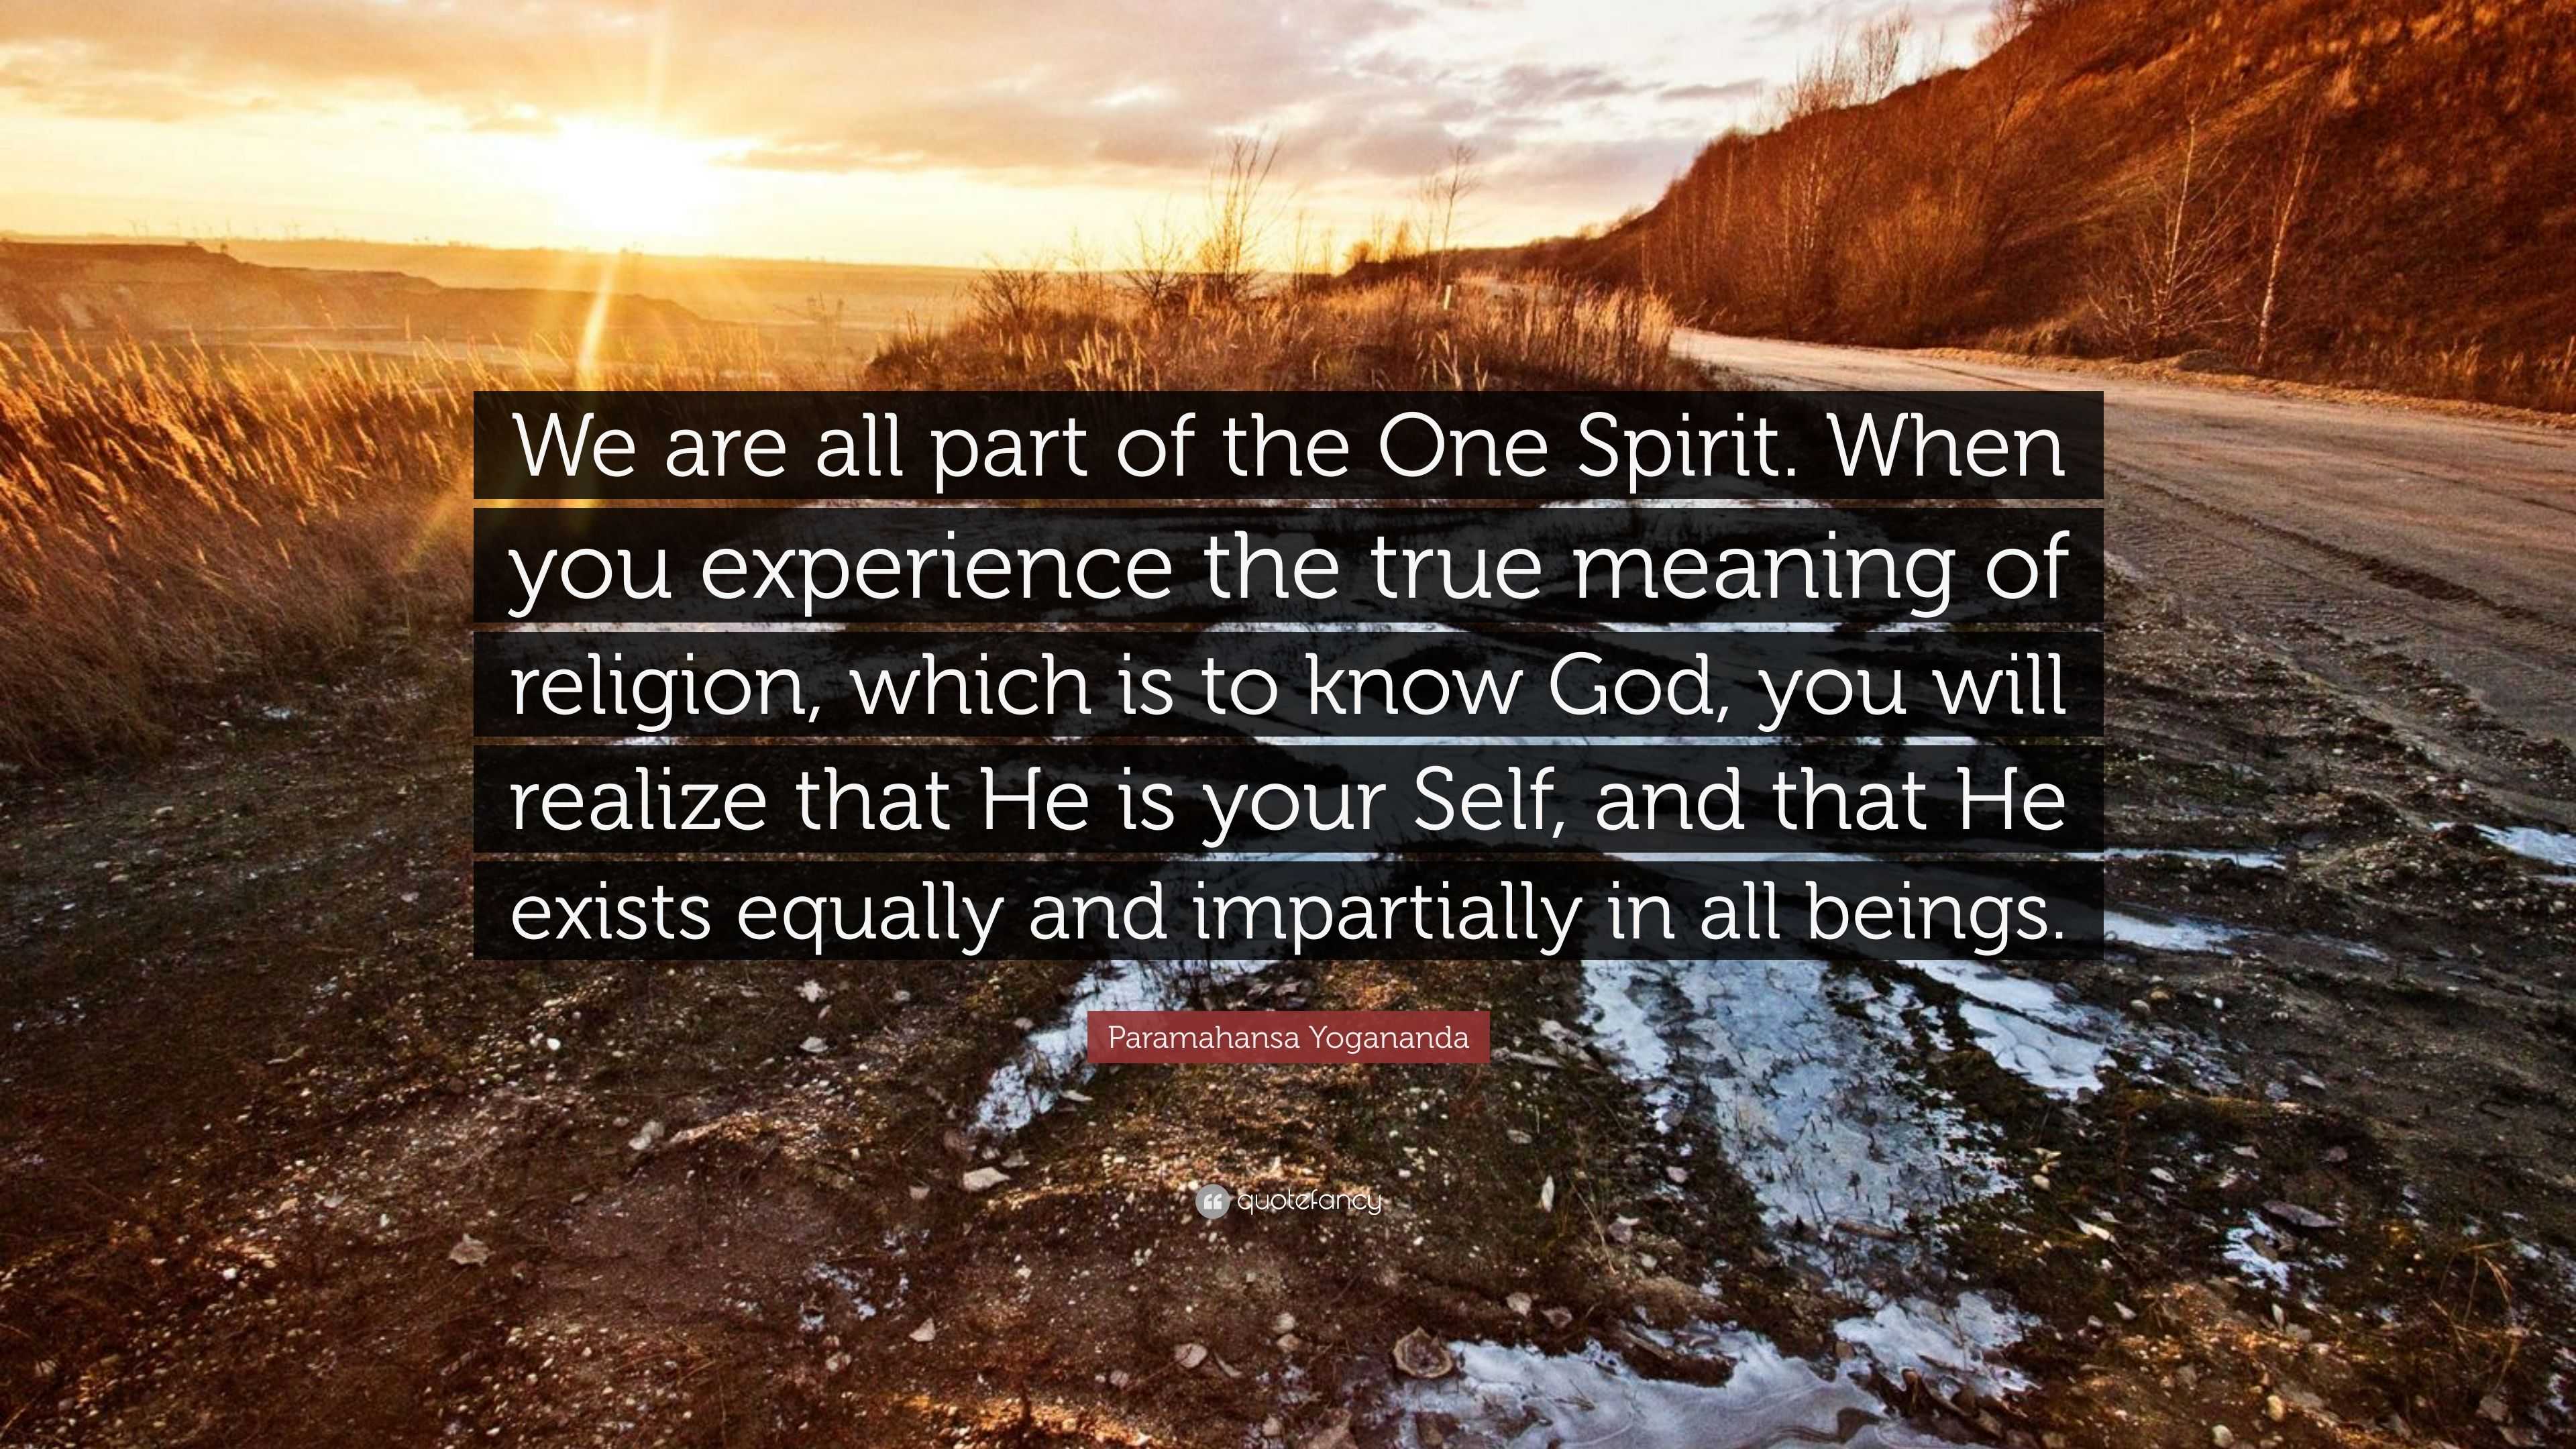 Paramahansa Yogananda Quote: “We are all part of the One Spirit. When